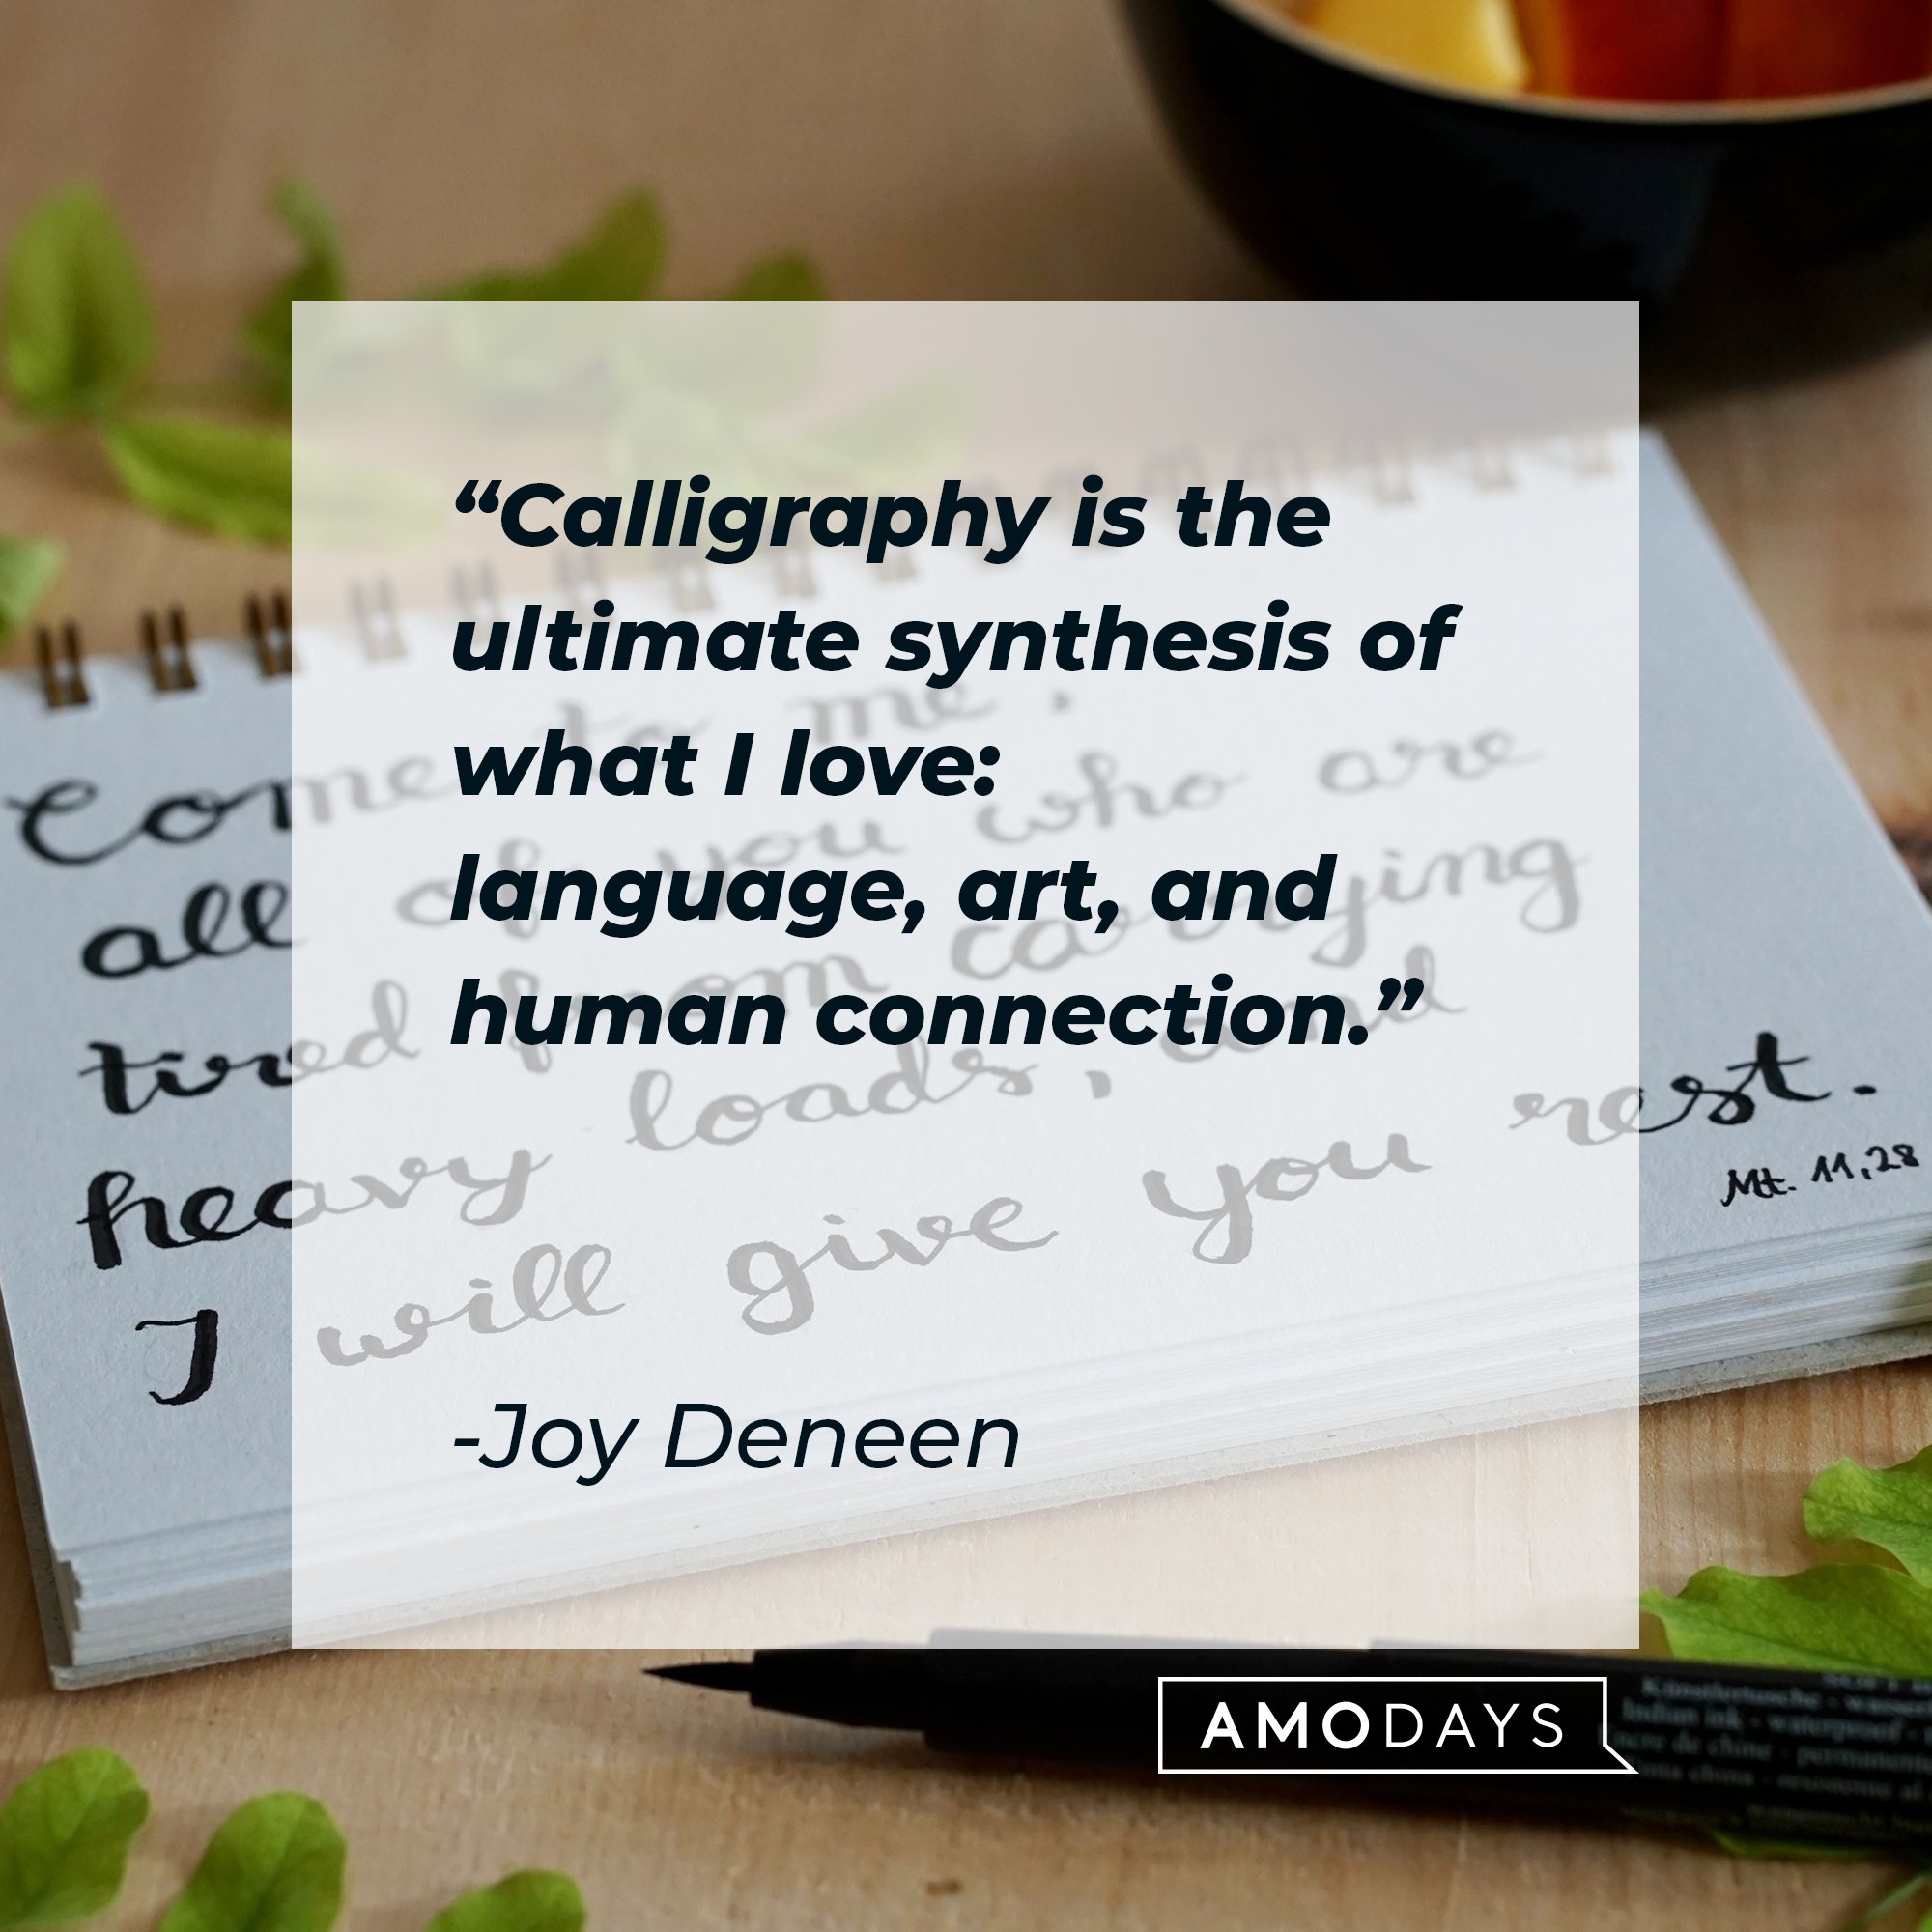 Robert Brenthurst’s quote: “Calligraphy—the dance, on a tiny stage, of the living, speaking hand…” | Image: AmoDays 